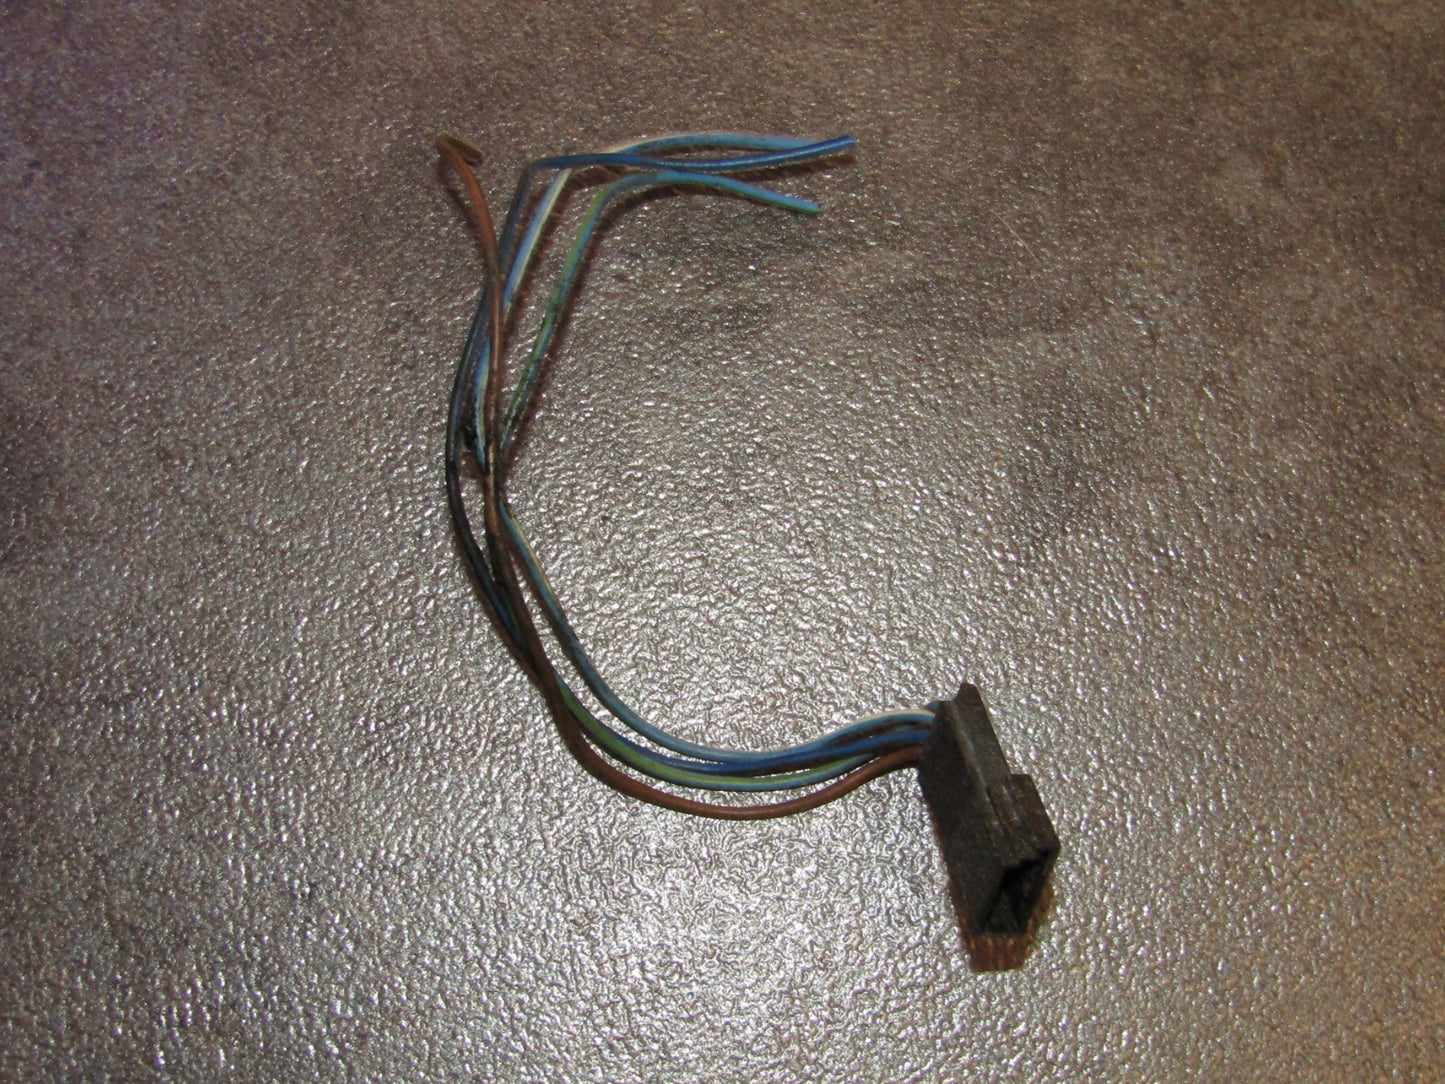 92 93 94 95 BMW 325i OEM Exterior Side Mirror Pigtail Harness Connector